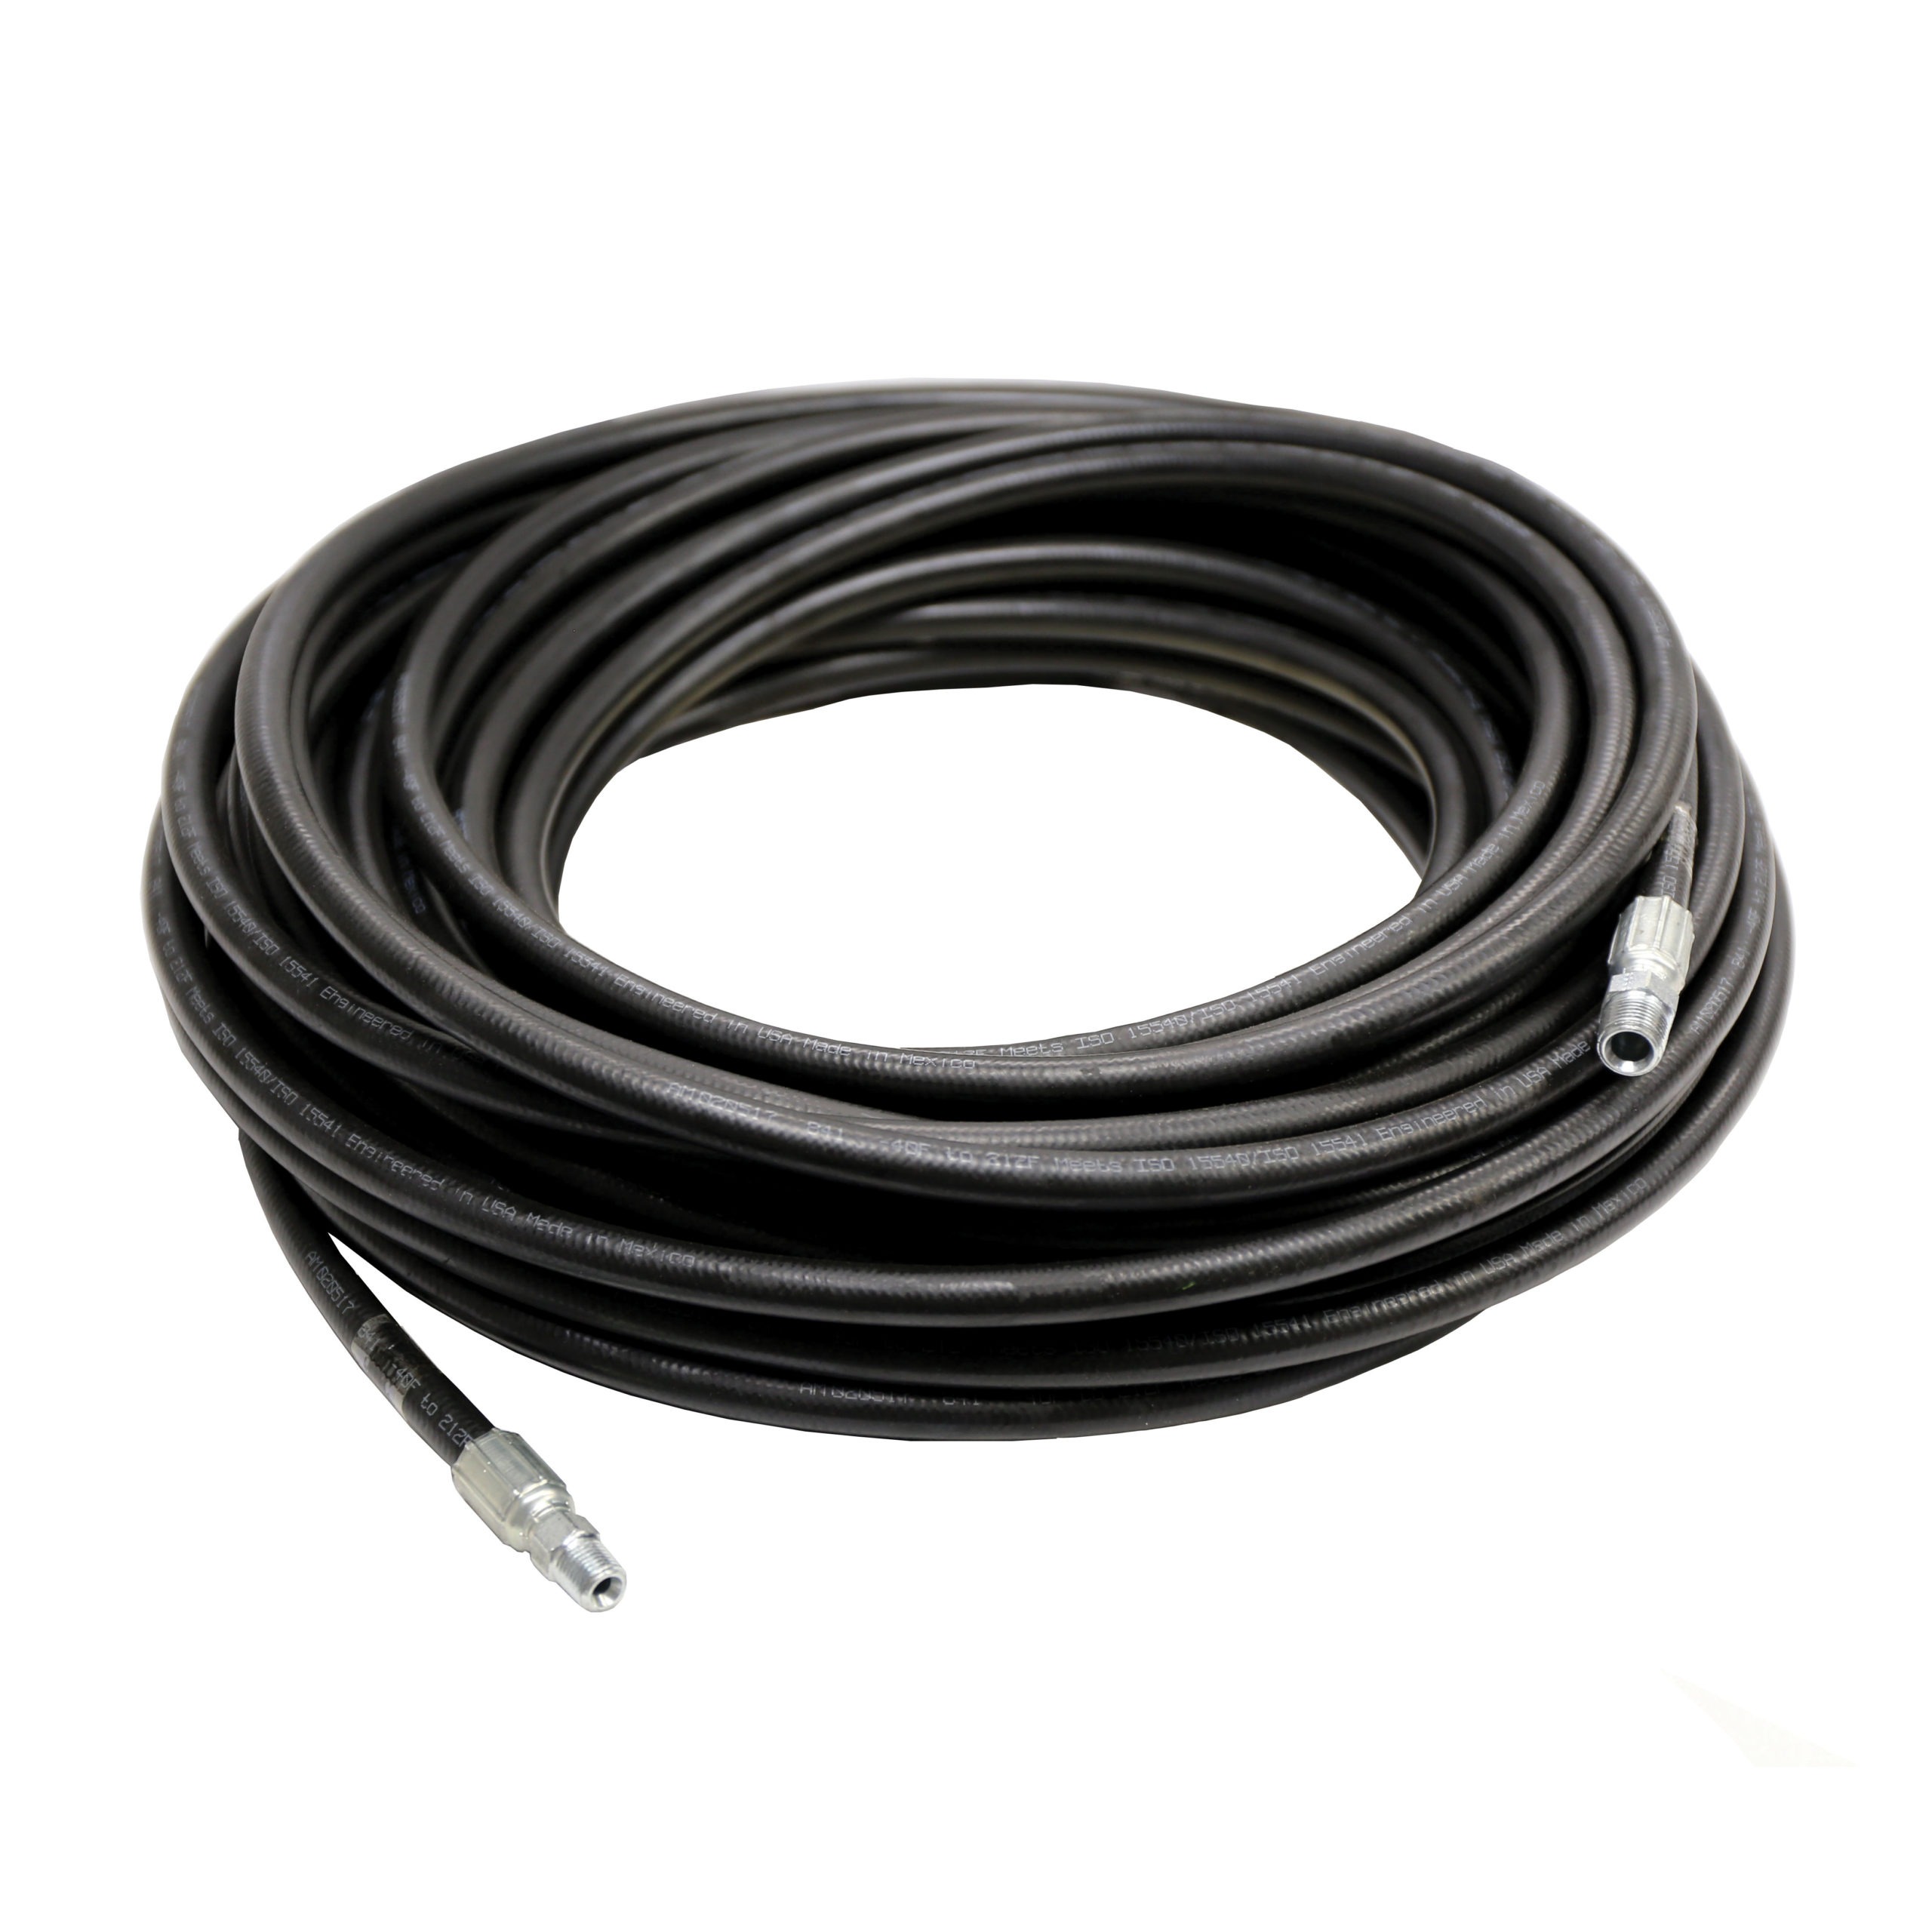 Reelcraft 33-260044 - 1/4 in. x 100 ft. High Pressure Grease Hose